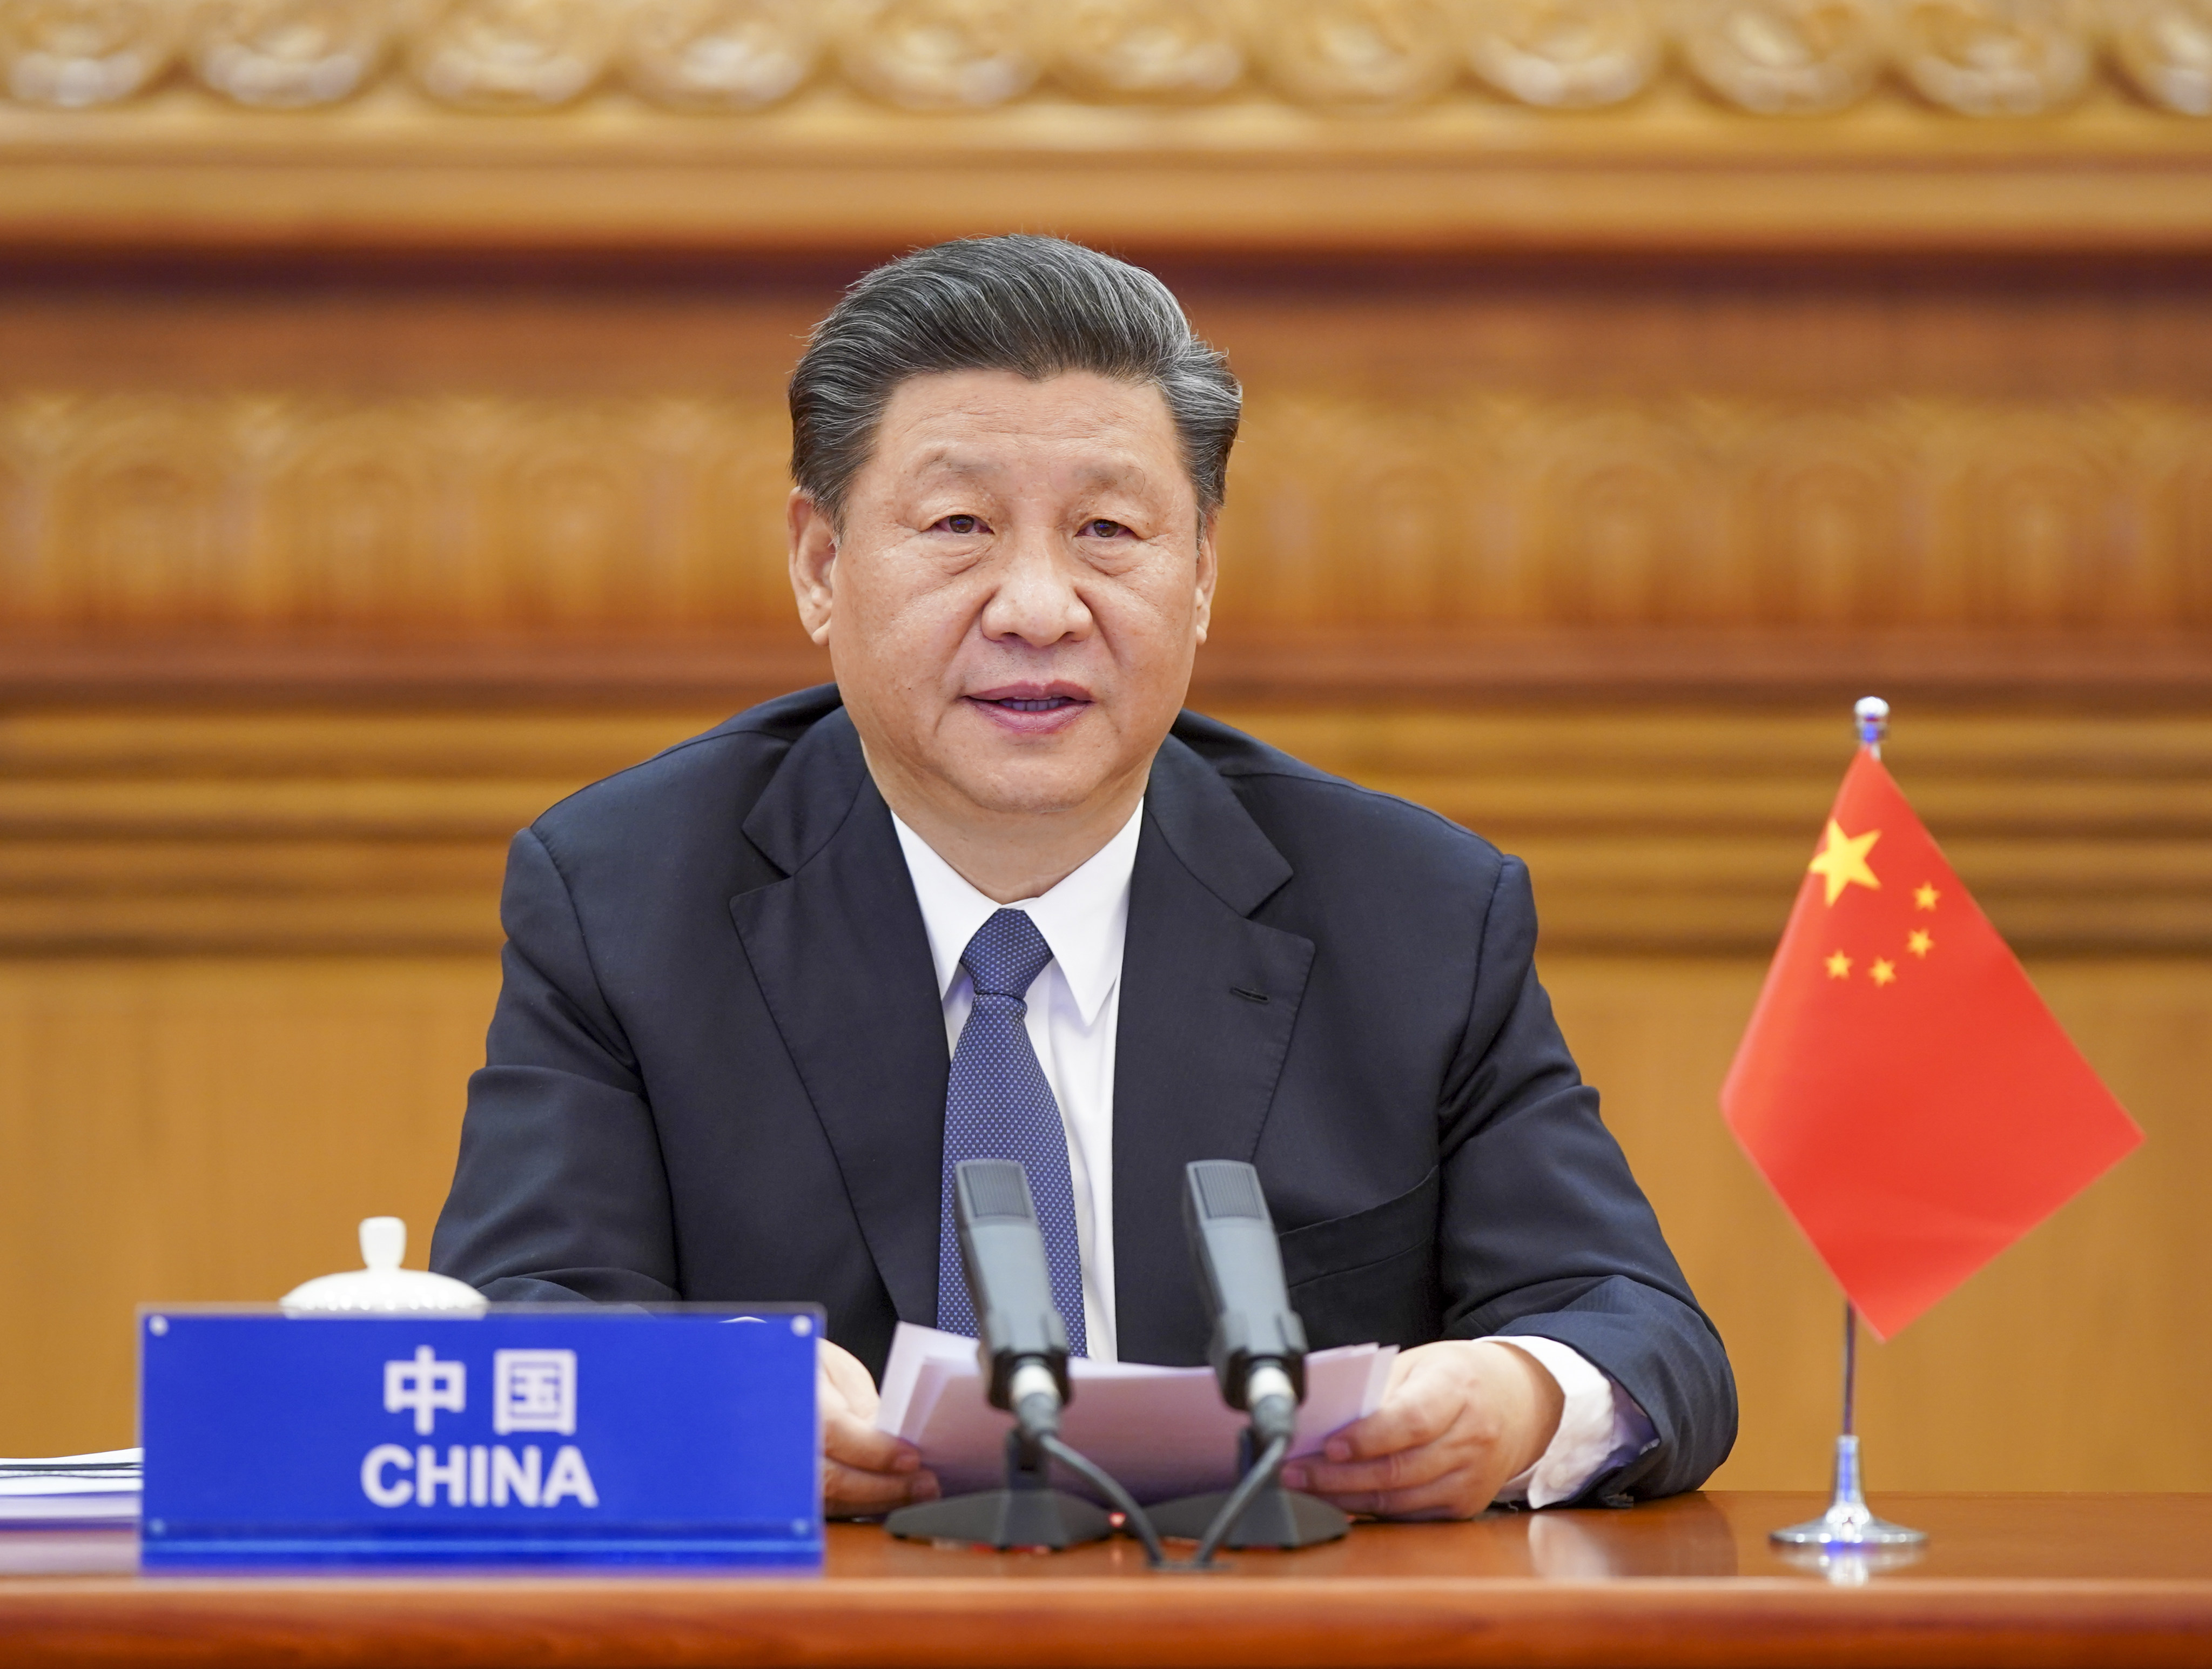 Xi Jinping is expected to attend the G20 summit in Bali next week, but whether he will meet the US president for talks while he’s there is not yet known. Photo: Xinhua